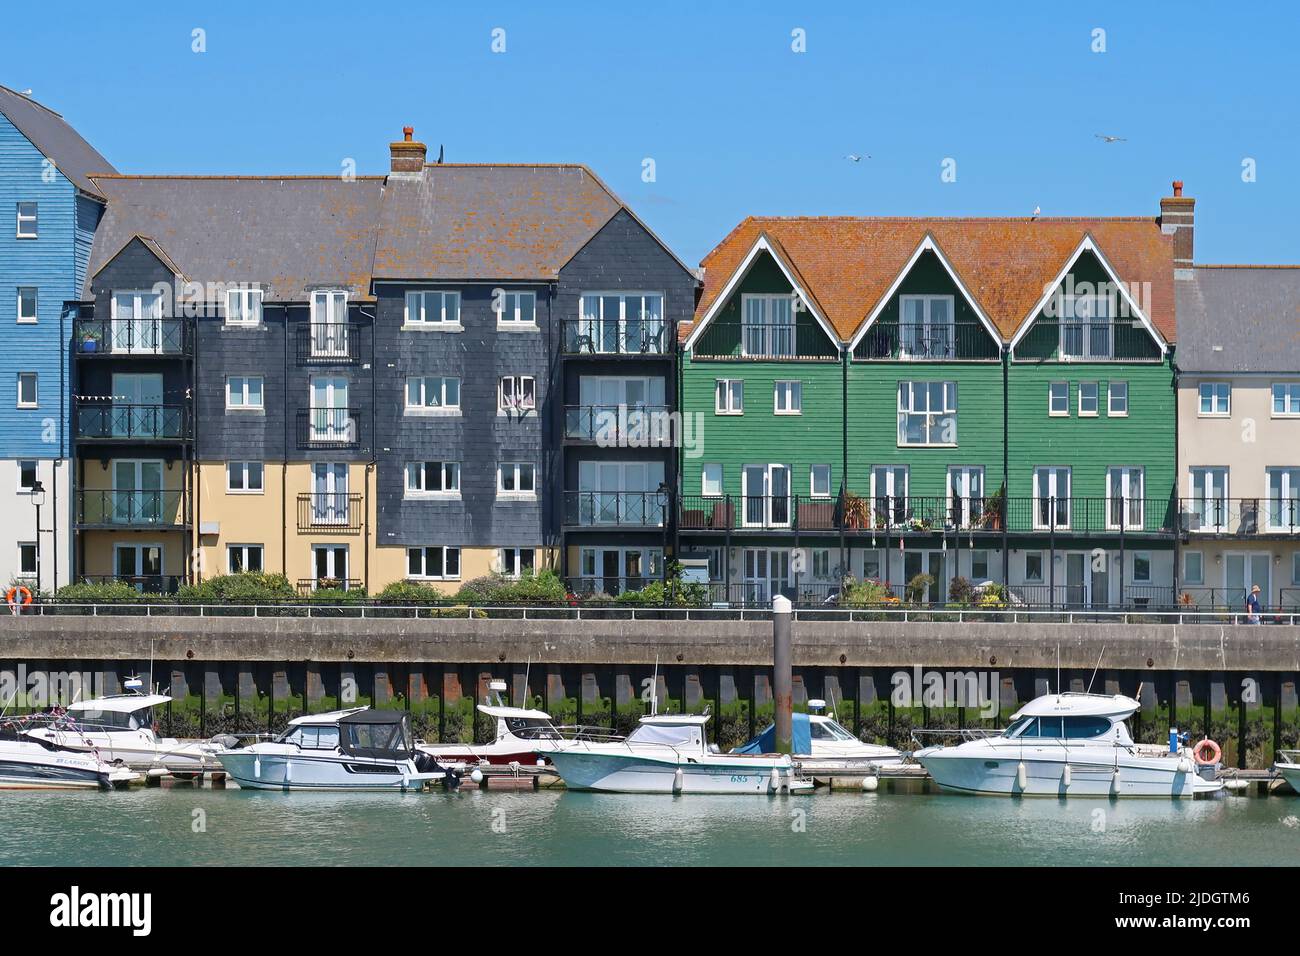 Littlehampton, West Sussex, UK. Recently developed waterfront housing on the East bank of the River Arun. Shows pontoon mooring and riverside footpath Stock Photo